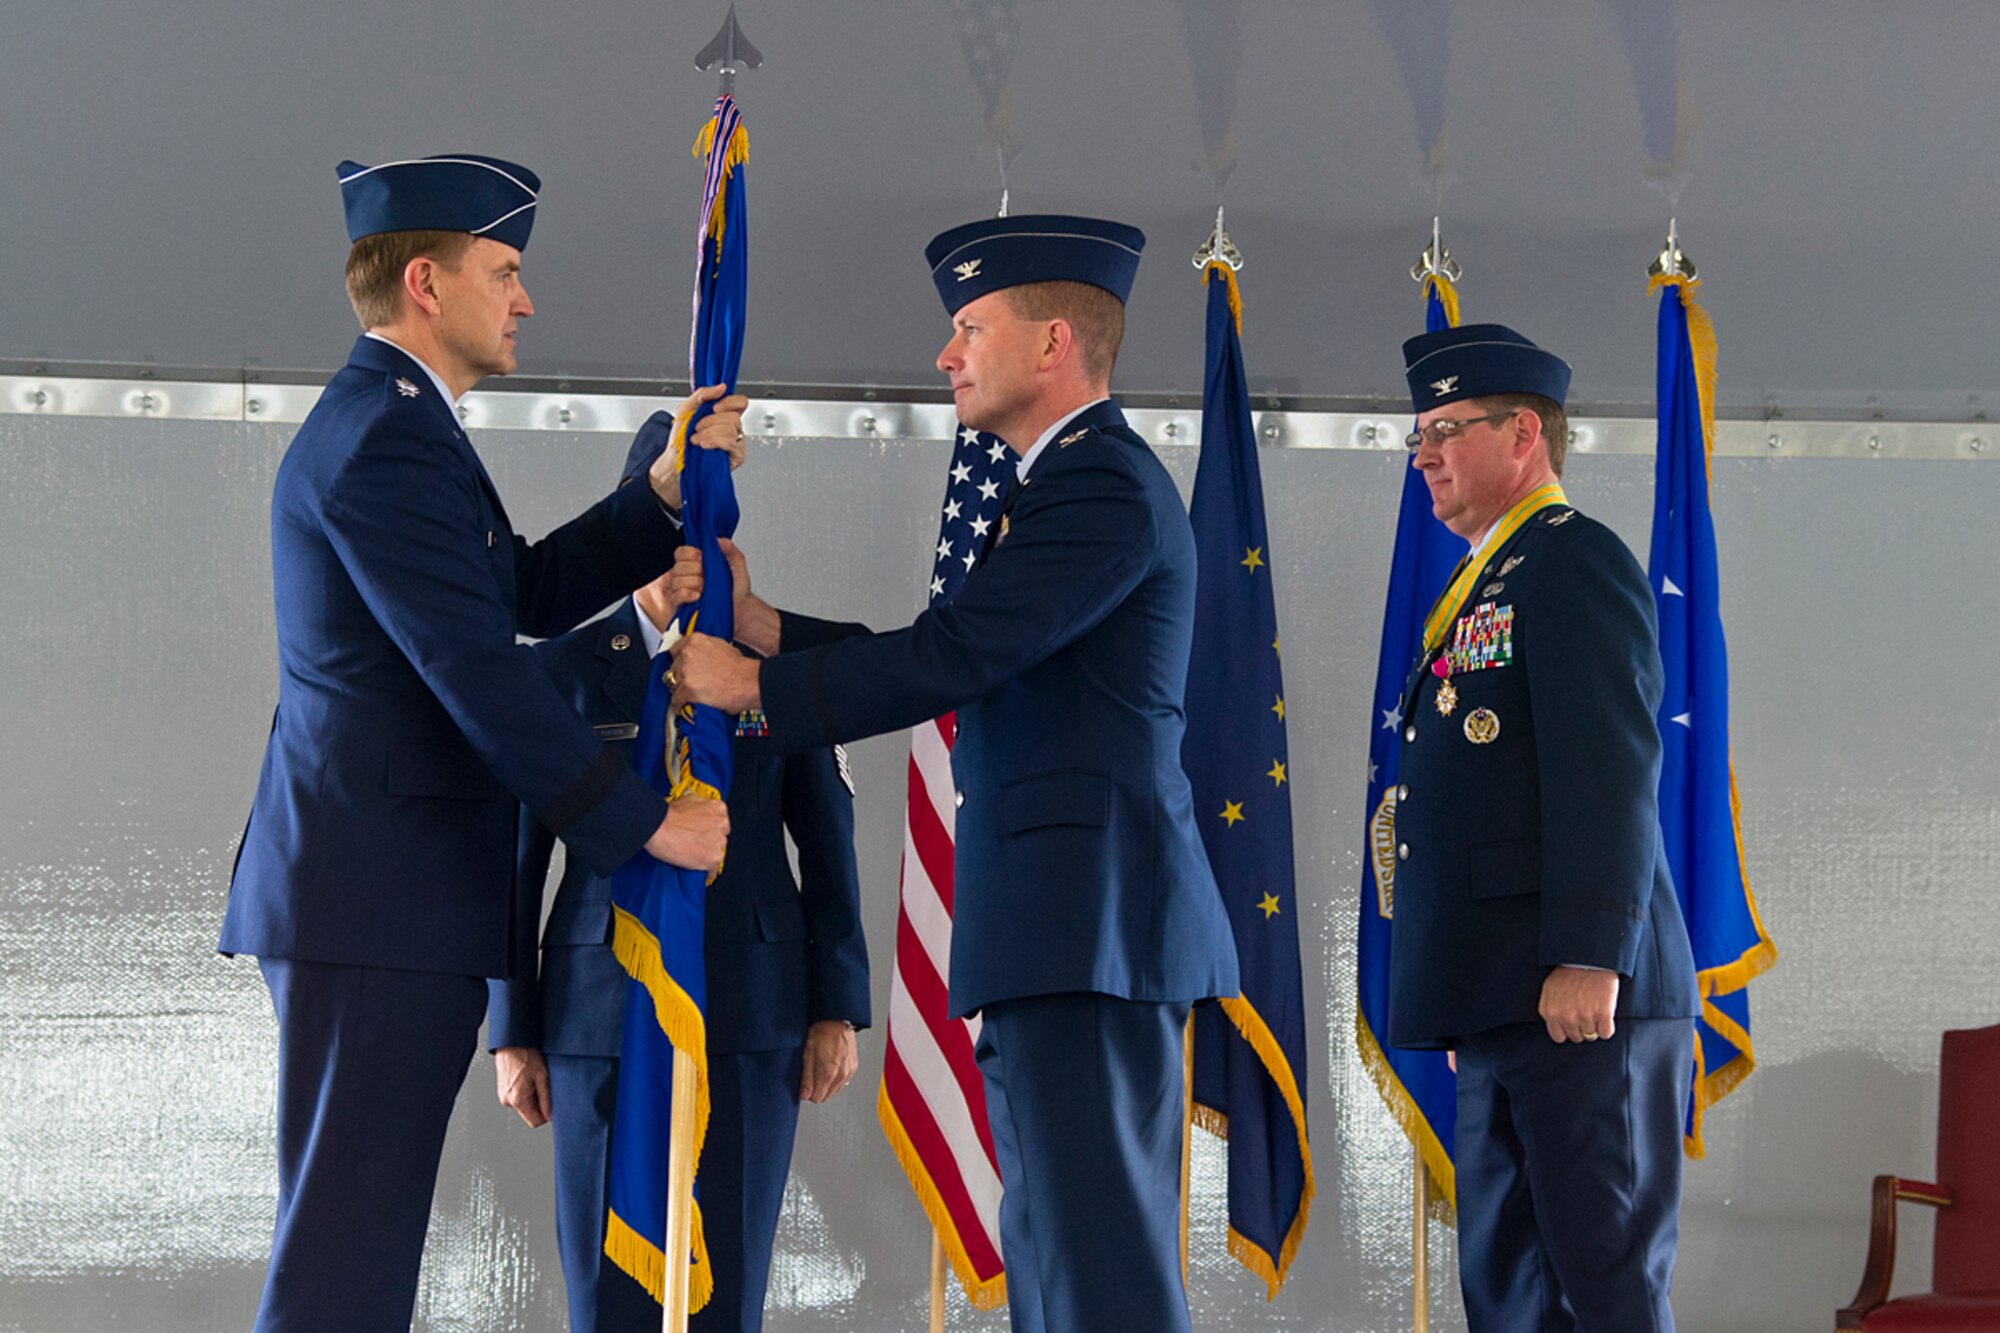 Air Force Col. Brian Duffy assumes command from Lt. Gen. Stephen Hoog, Alaska Command and 11th Air Force commander, of Joint Base Elmendorf-Richardson and the 673d Air Base Wing during a change-of-command ceremony at Hangar 5 on JBER June 1, 2012. Duffy comes from Kadena Air Base where he served as the commander of the 18th Civil Engineer Group. (U.S. Air Force photo/Staff Sgt. Zachary Wolf) 